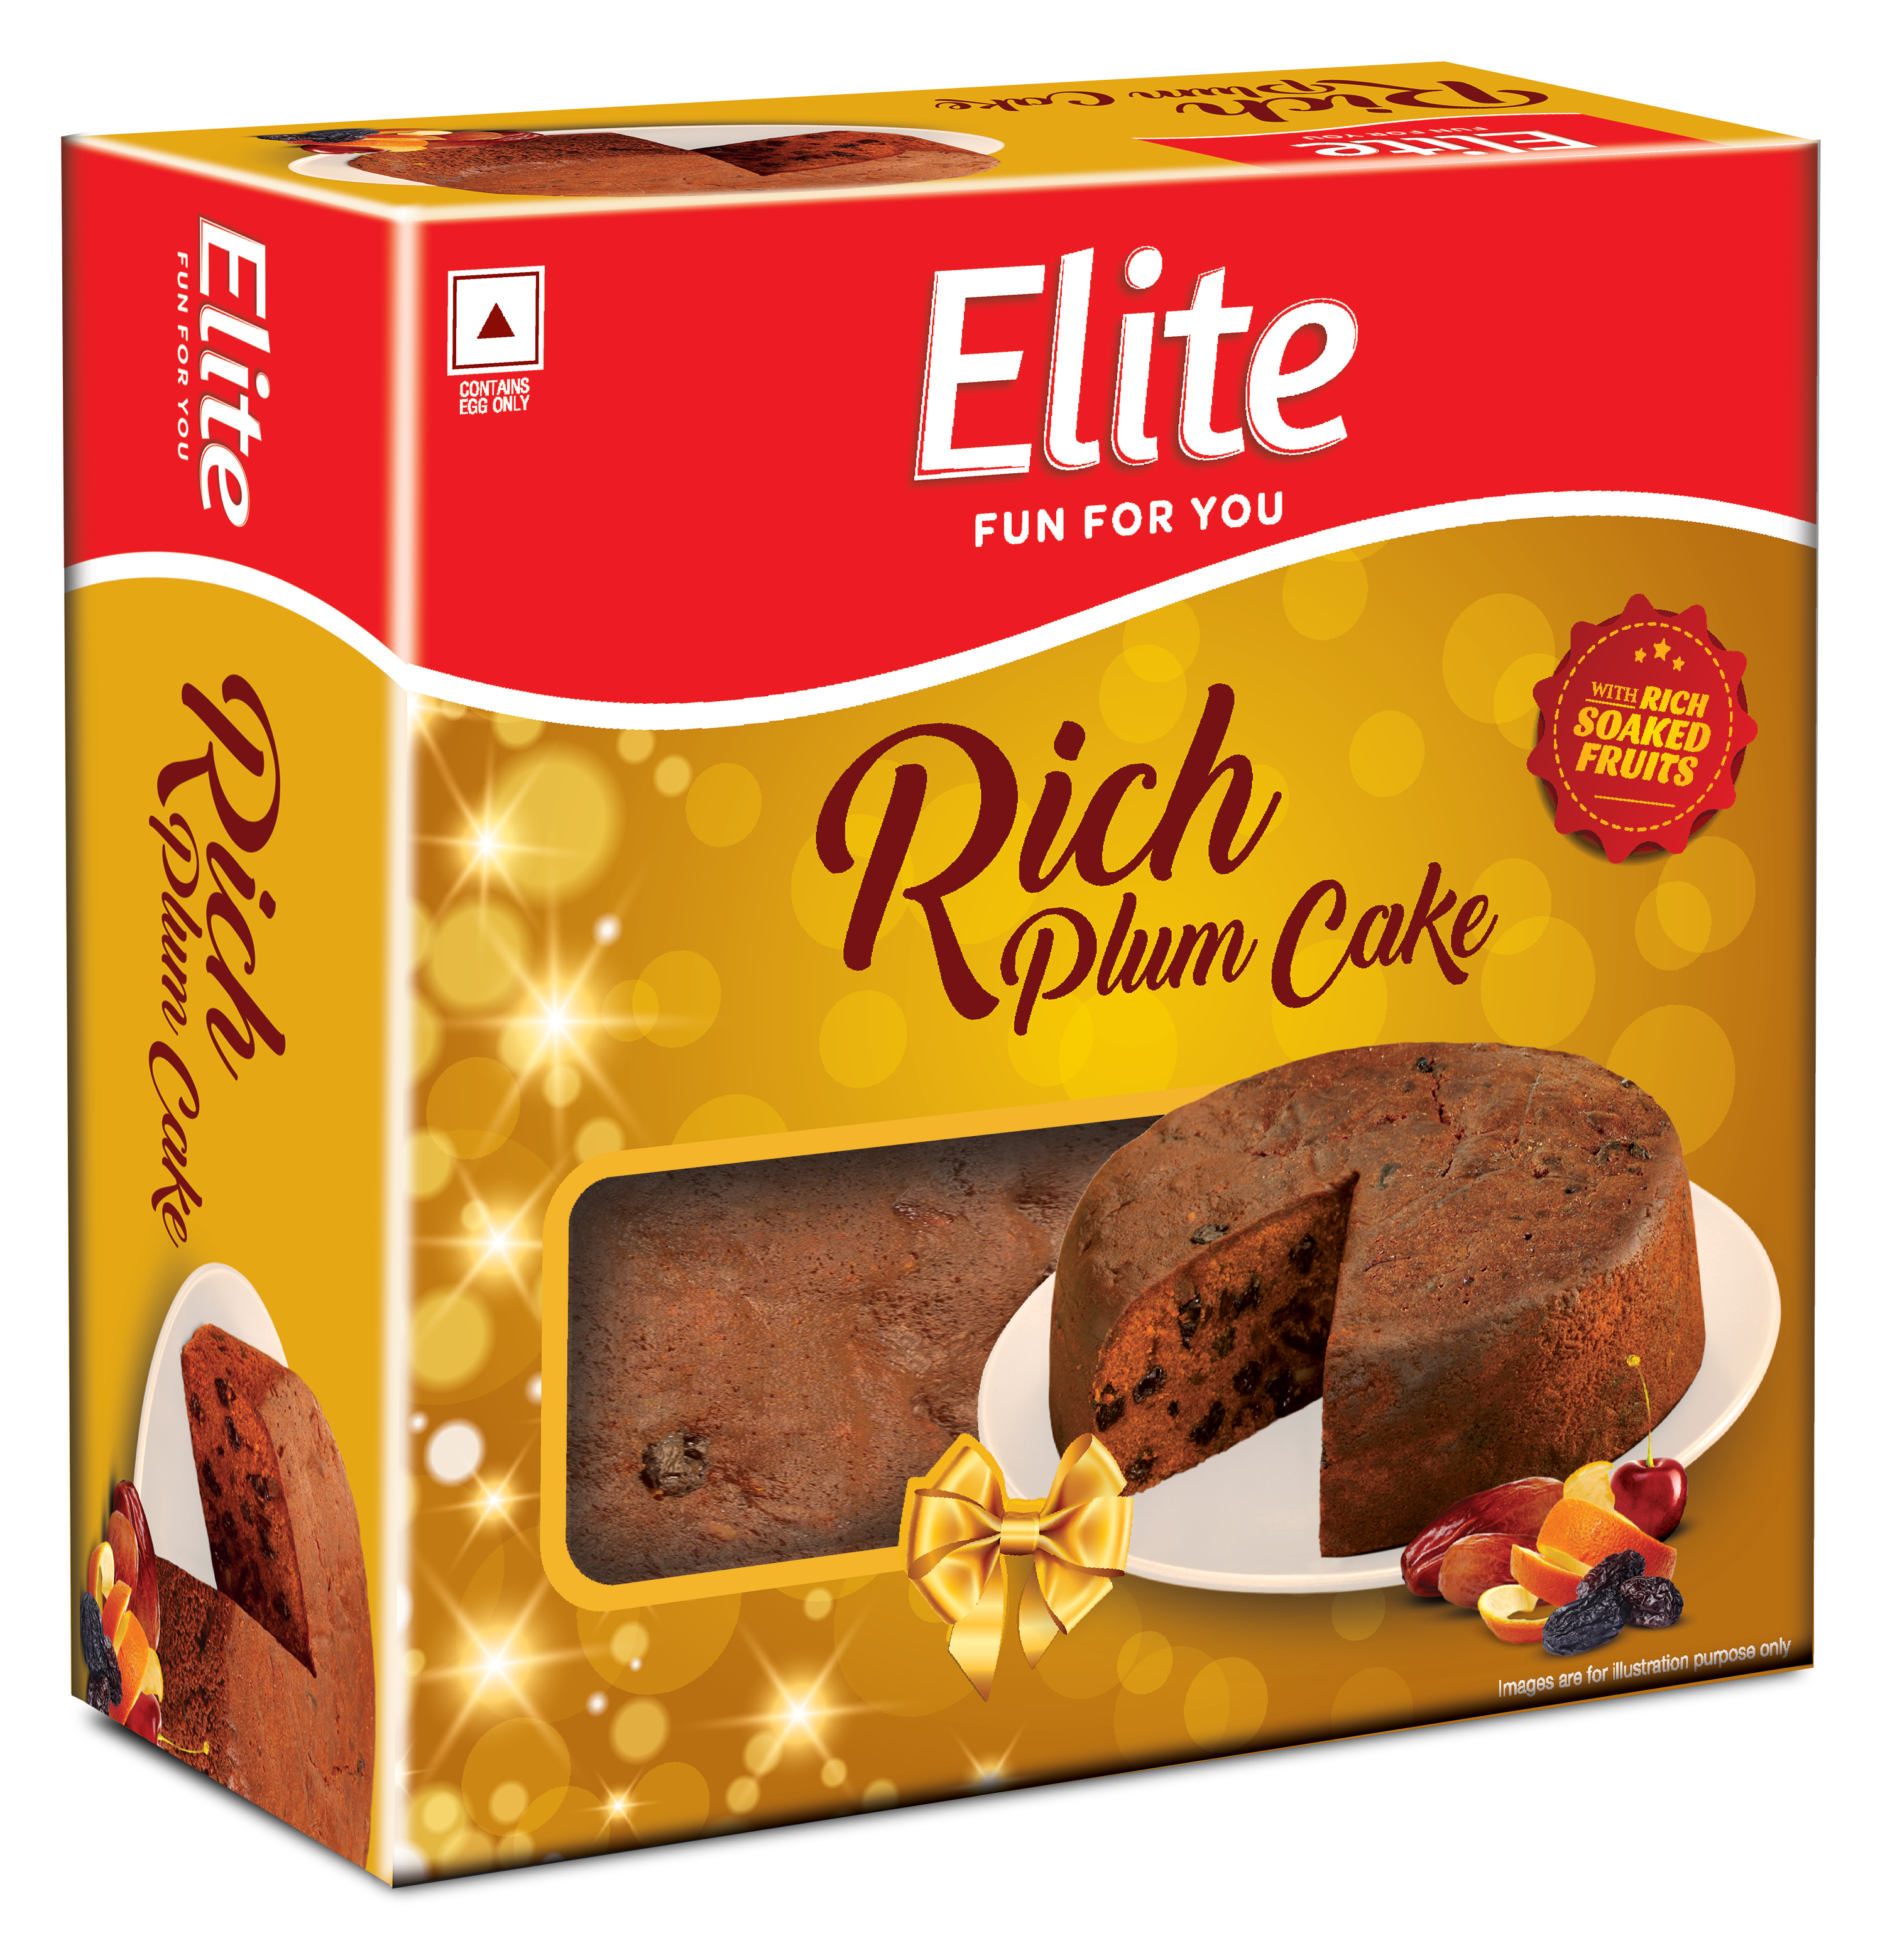 elite plum cake - Send Indian Sweets to USA Online | Sweet Delivery in USA